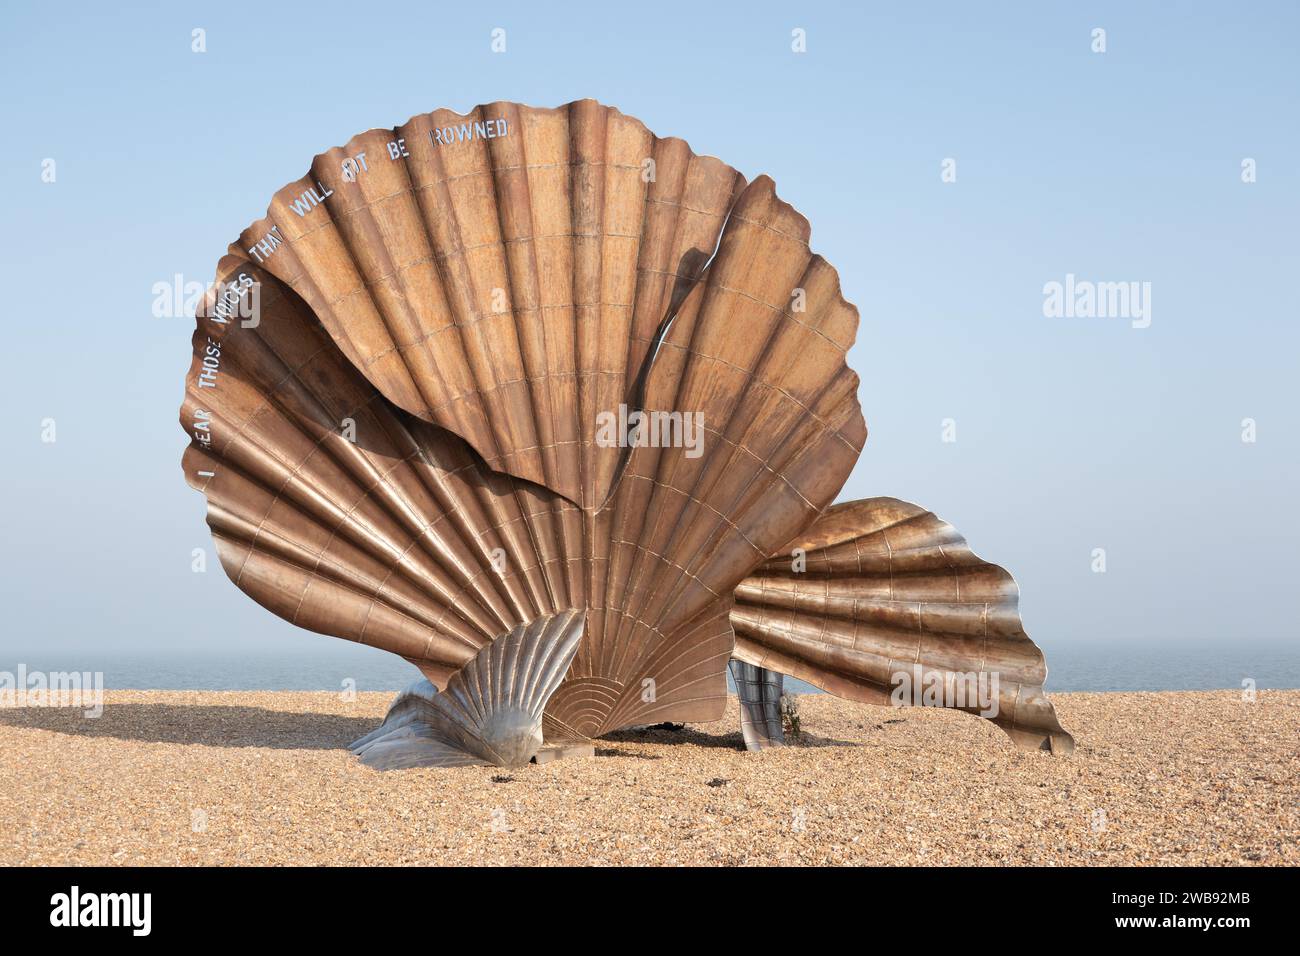 The Scallop, on the beach at Aldeburgh, Suffolk, England UK. A stainless steel by Suffolk-based artist Maggi Hambling, it stands 15 feet (4.6 m) high, Stock Photo